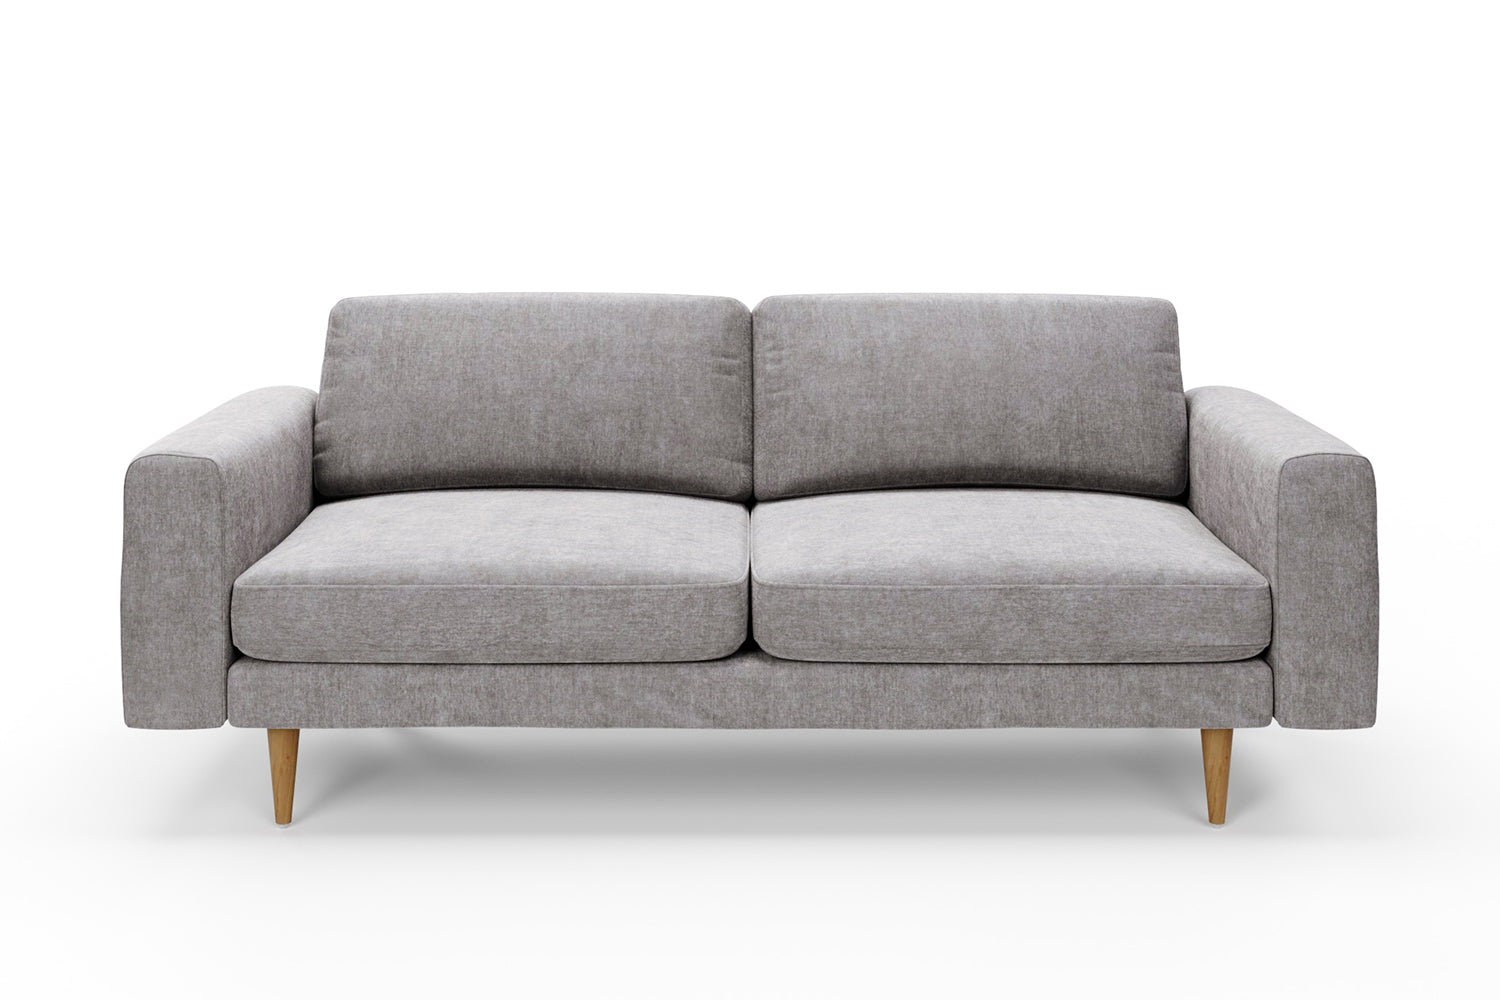 SNUG | The Big Chill 3 Seater Sofa in Mid Grey variant_40414878662704